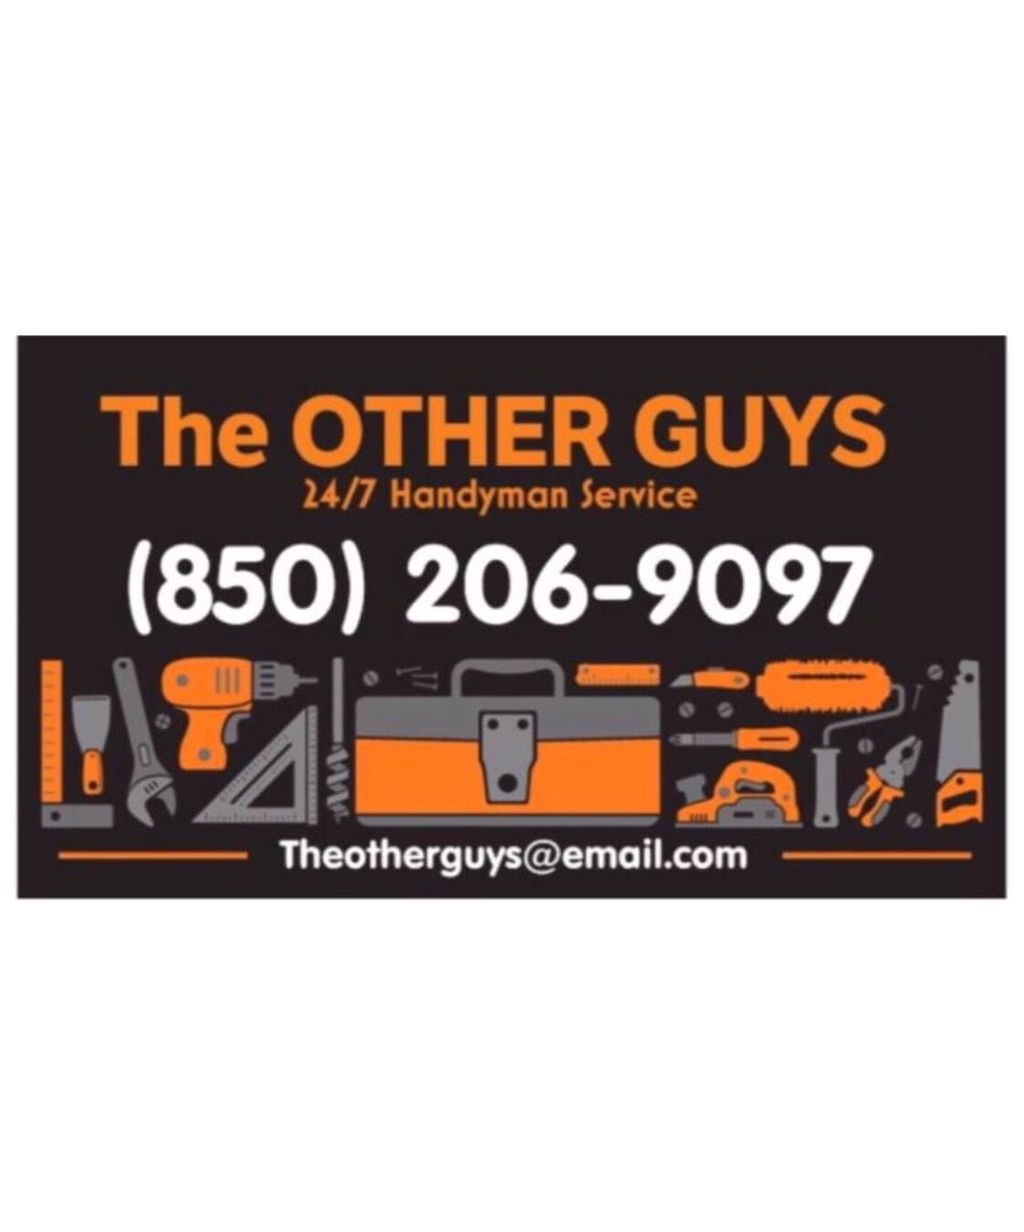 The Other Guys Home repair & Handyman Services